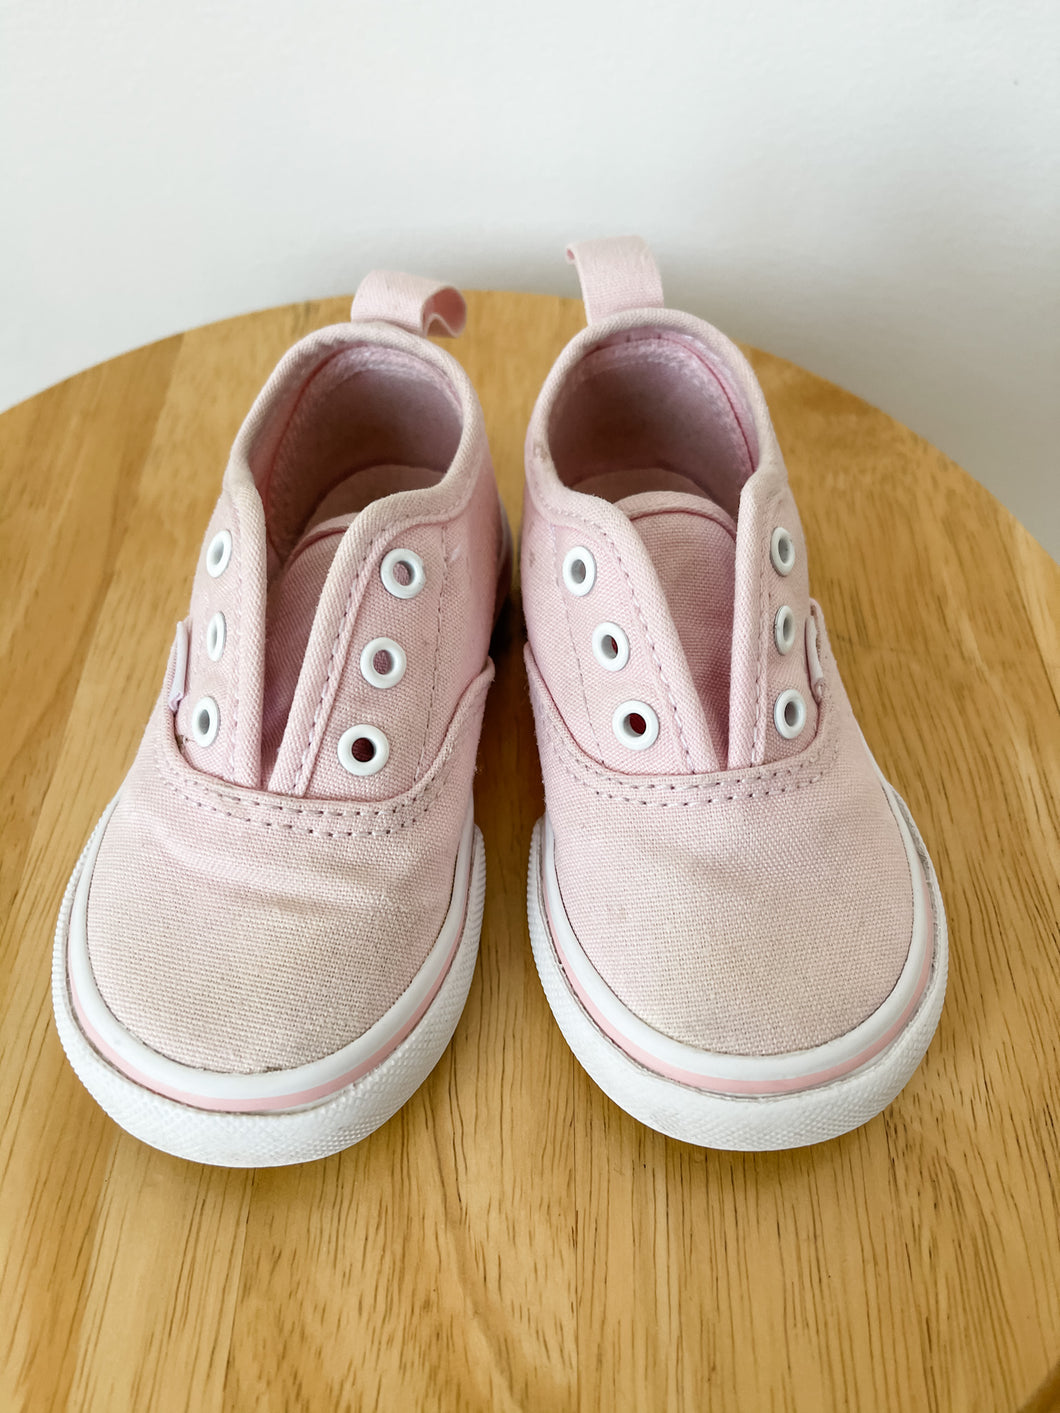 Girls Pink Vans Shoes Size 5.5